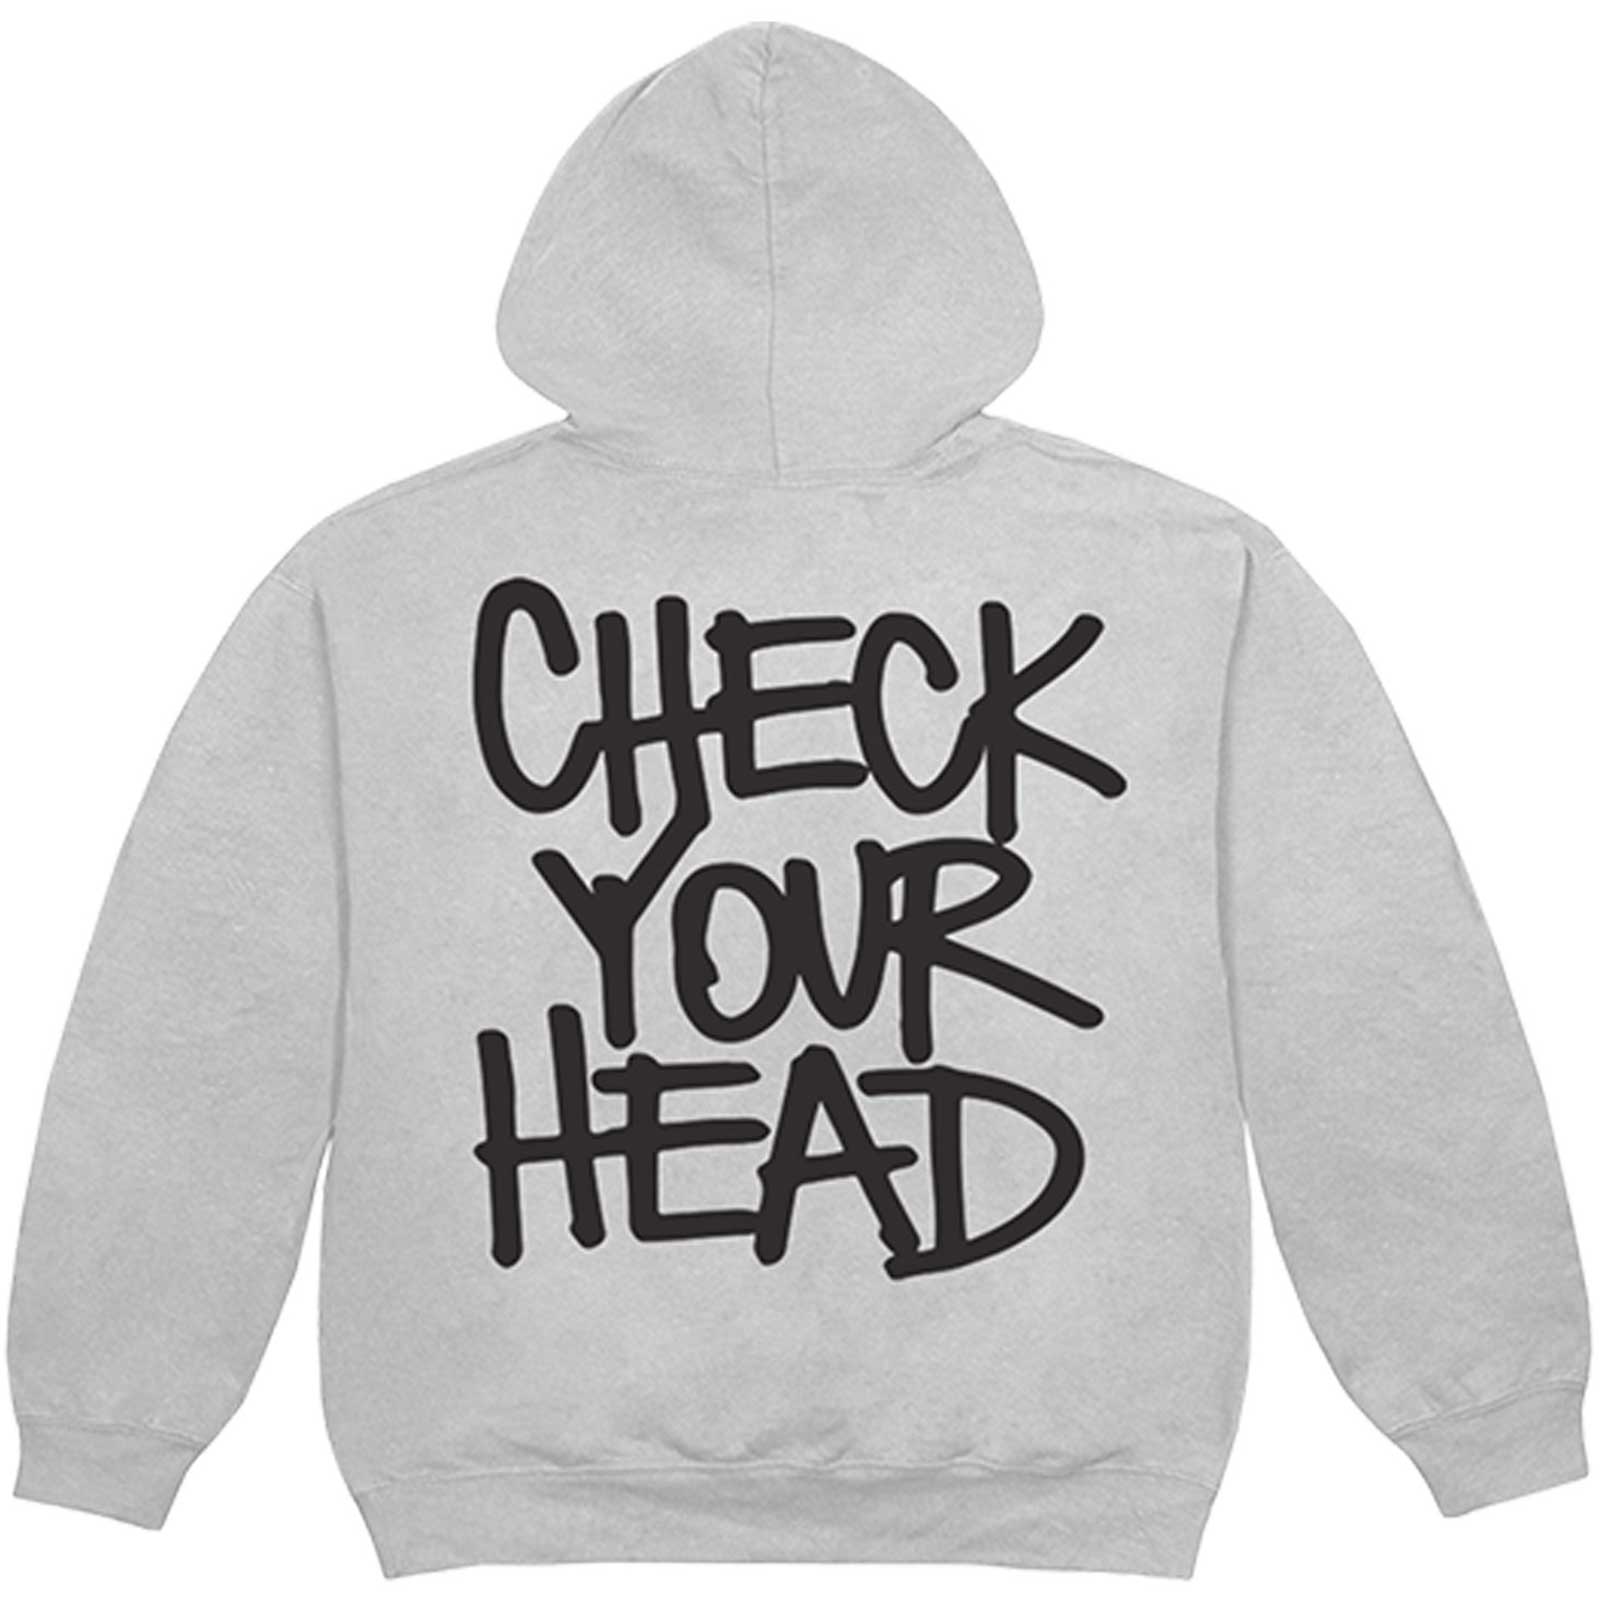 The Beastie Boys Unisex Hoodie - Check Your Head - Grey Official Licensed Design